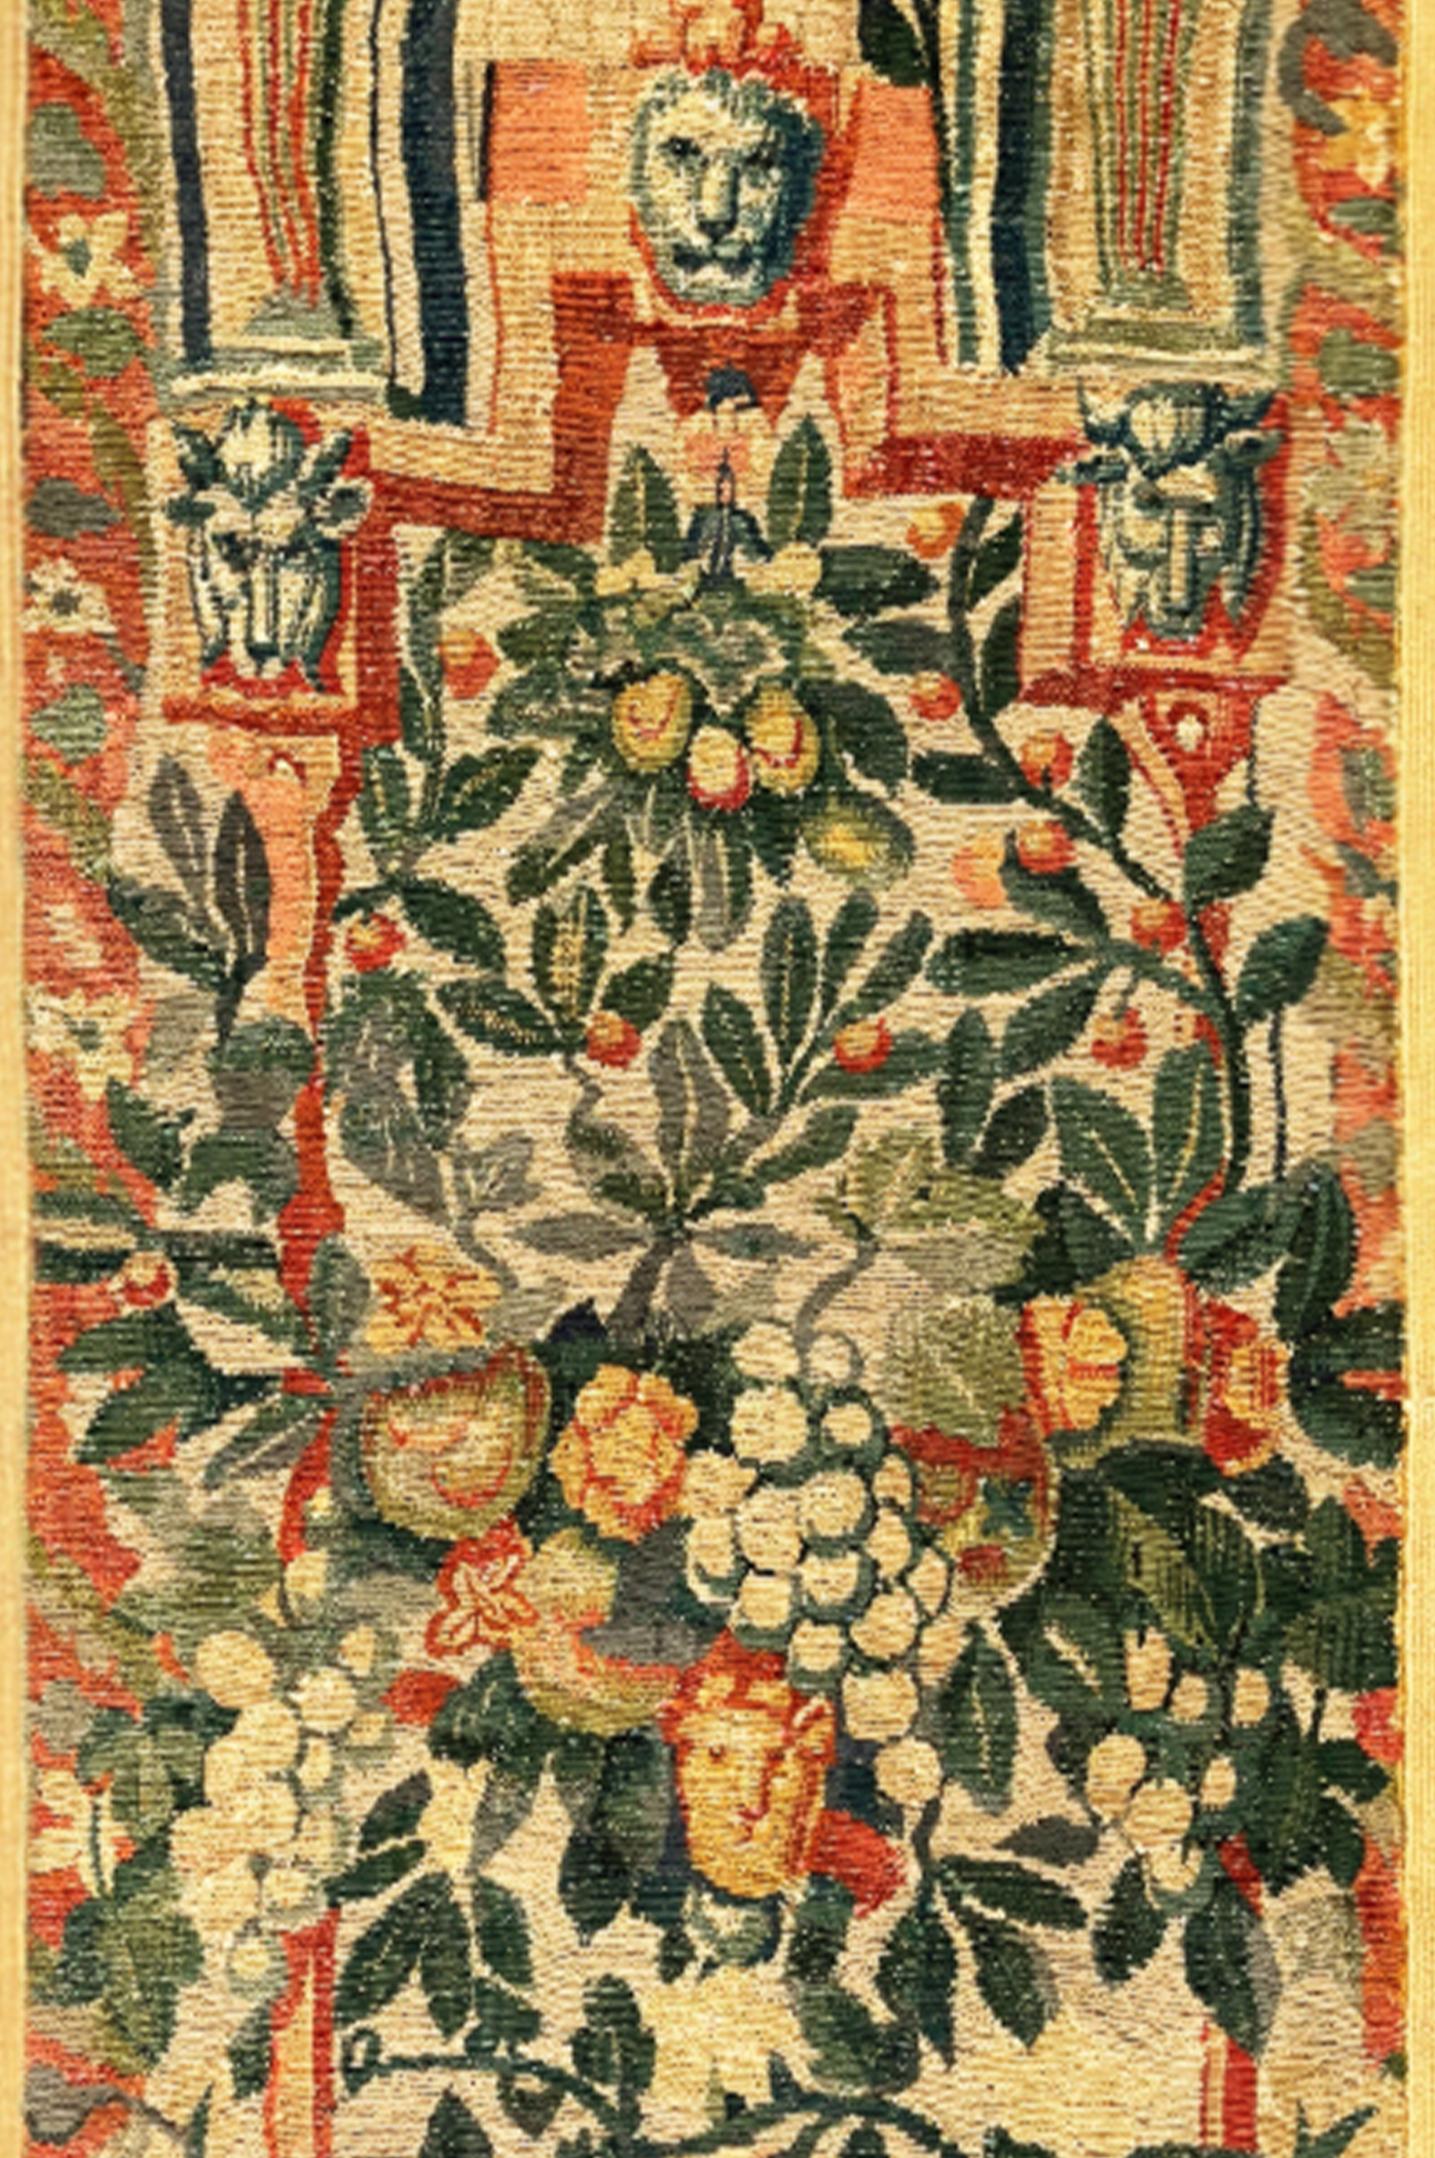 Late 16th Century Brussels Historical Tapestry Panel, Woman & Flowers, Vertical In Good Condition For Sale In New York, NY